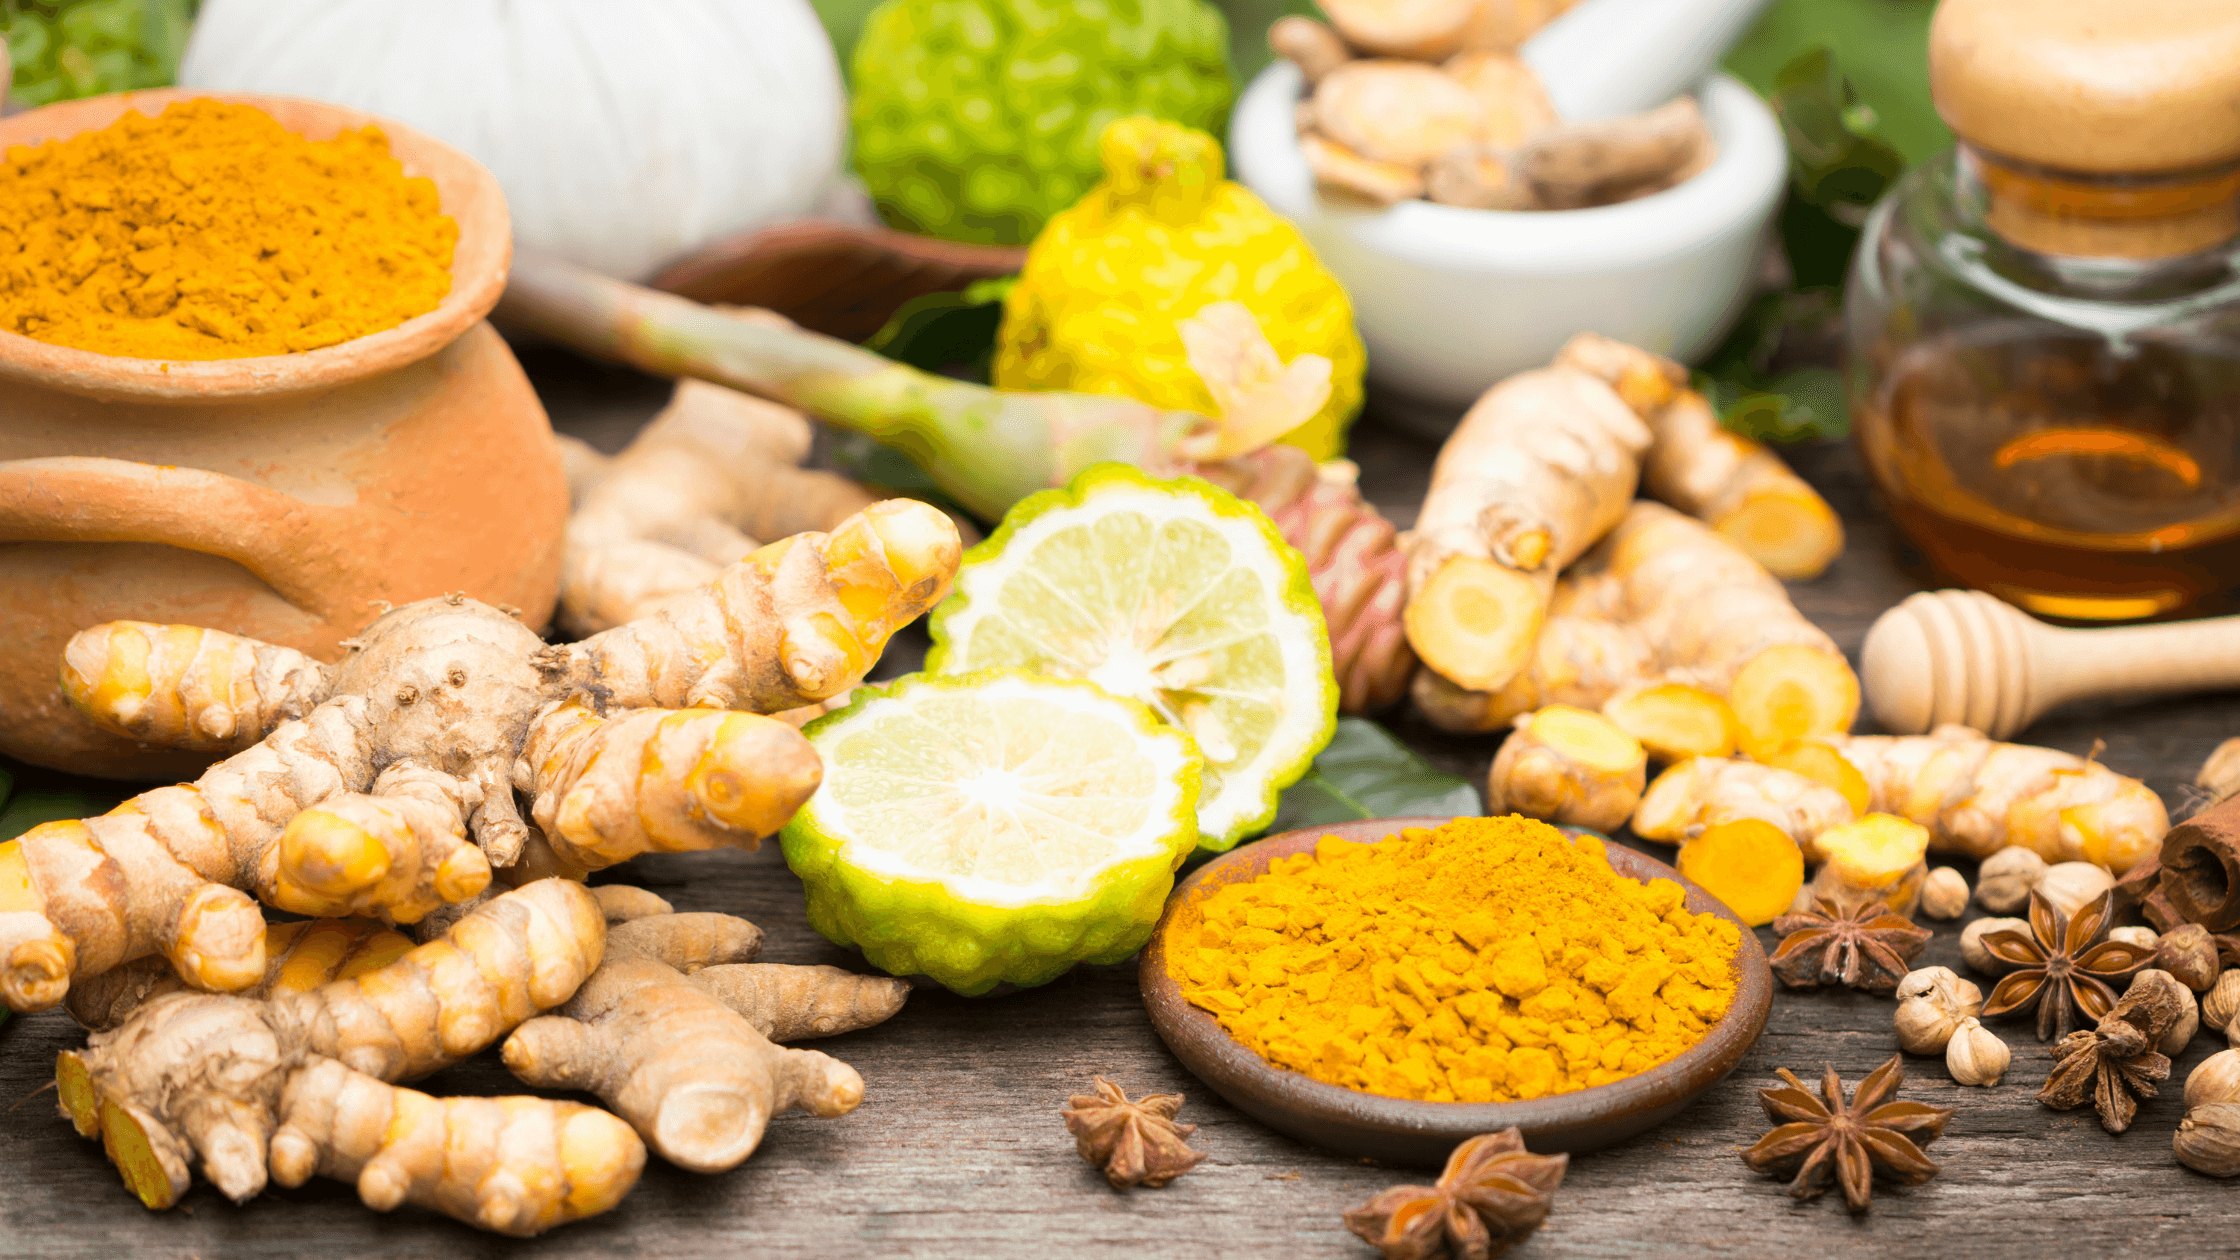 Ayurvedic Immunity Boosters | Benefits, Types, Pros, Cons and More